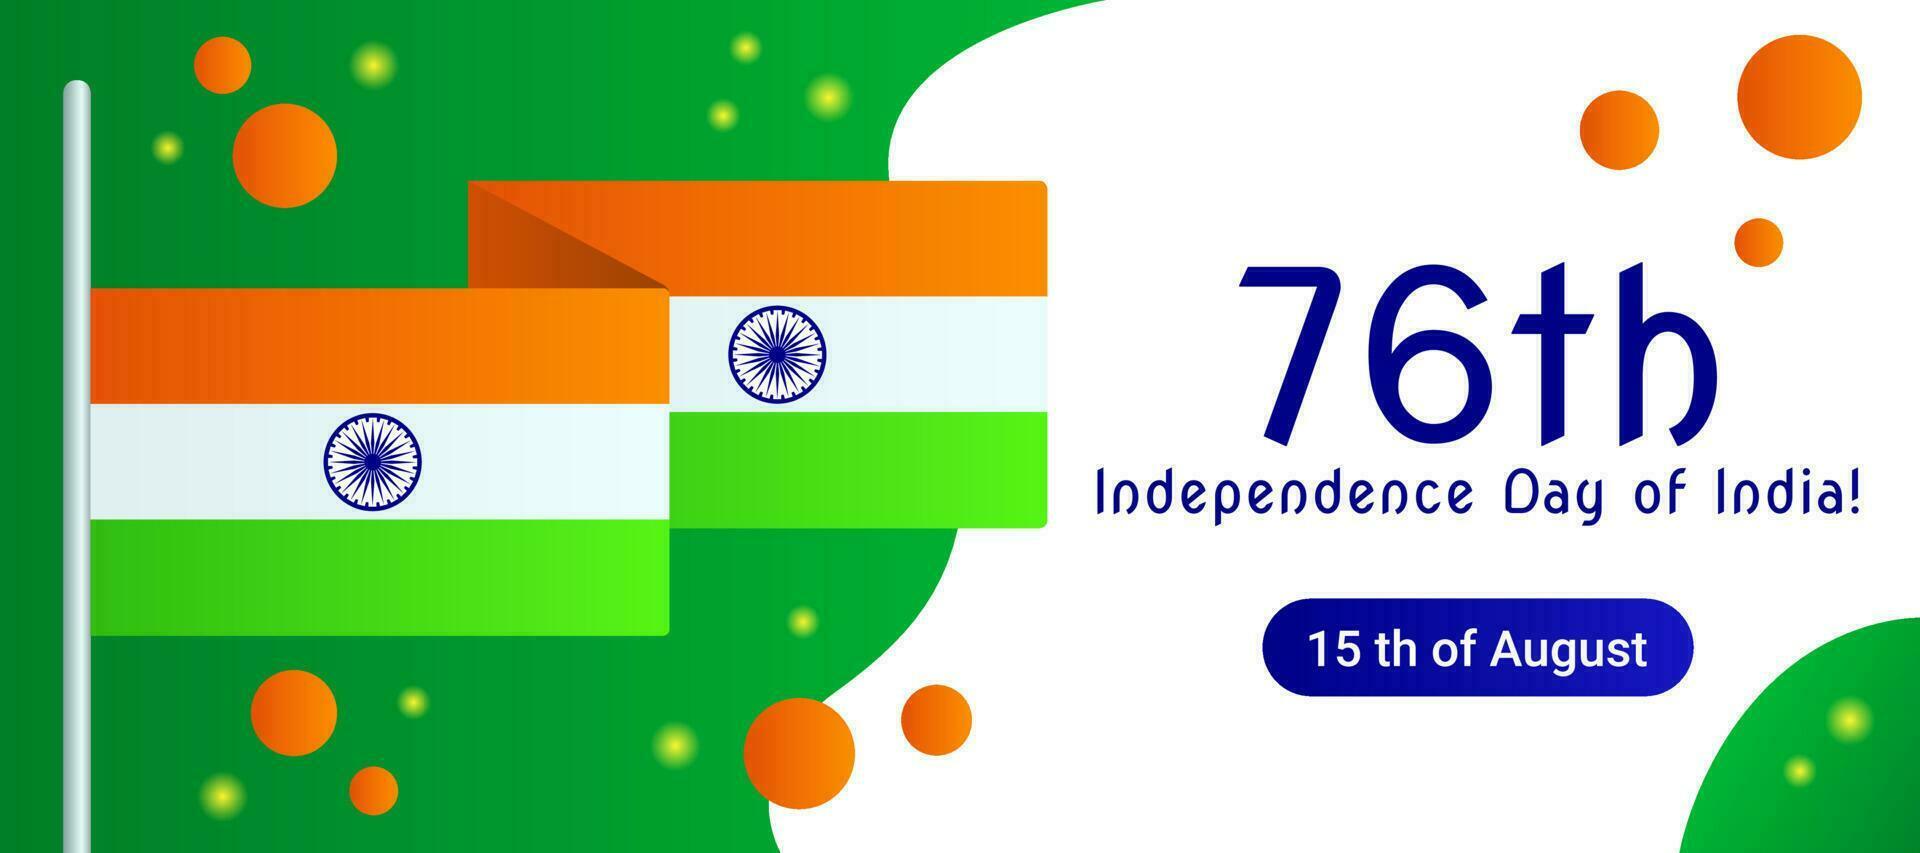 Indian 76th anniversary of Independence, Independence Day of India day, 15th august holiday banner, greeting, invitation with national symbols. vector